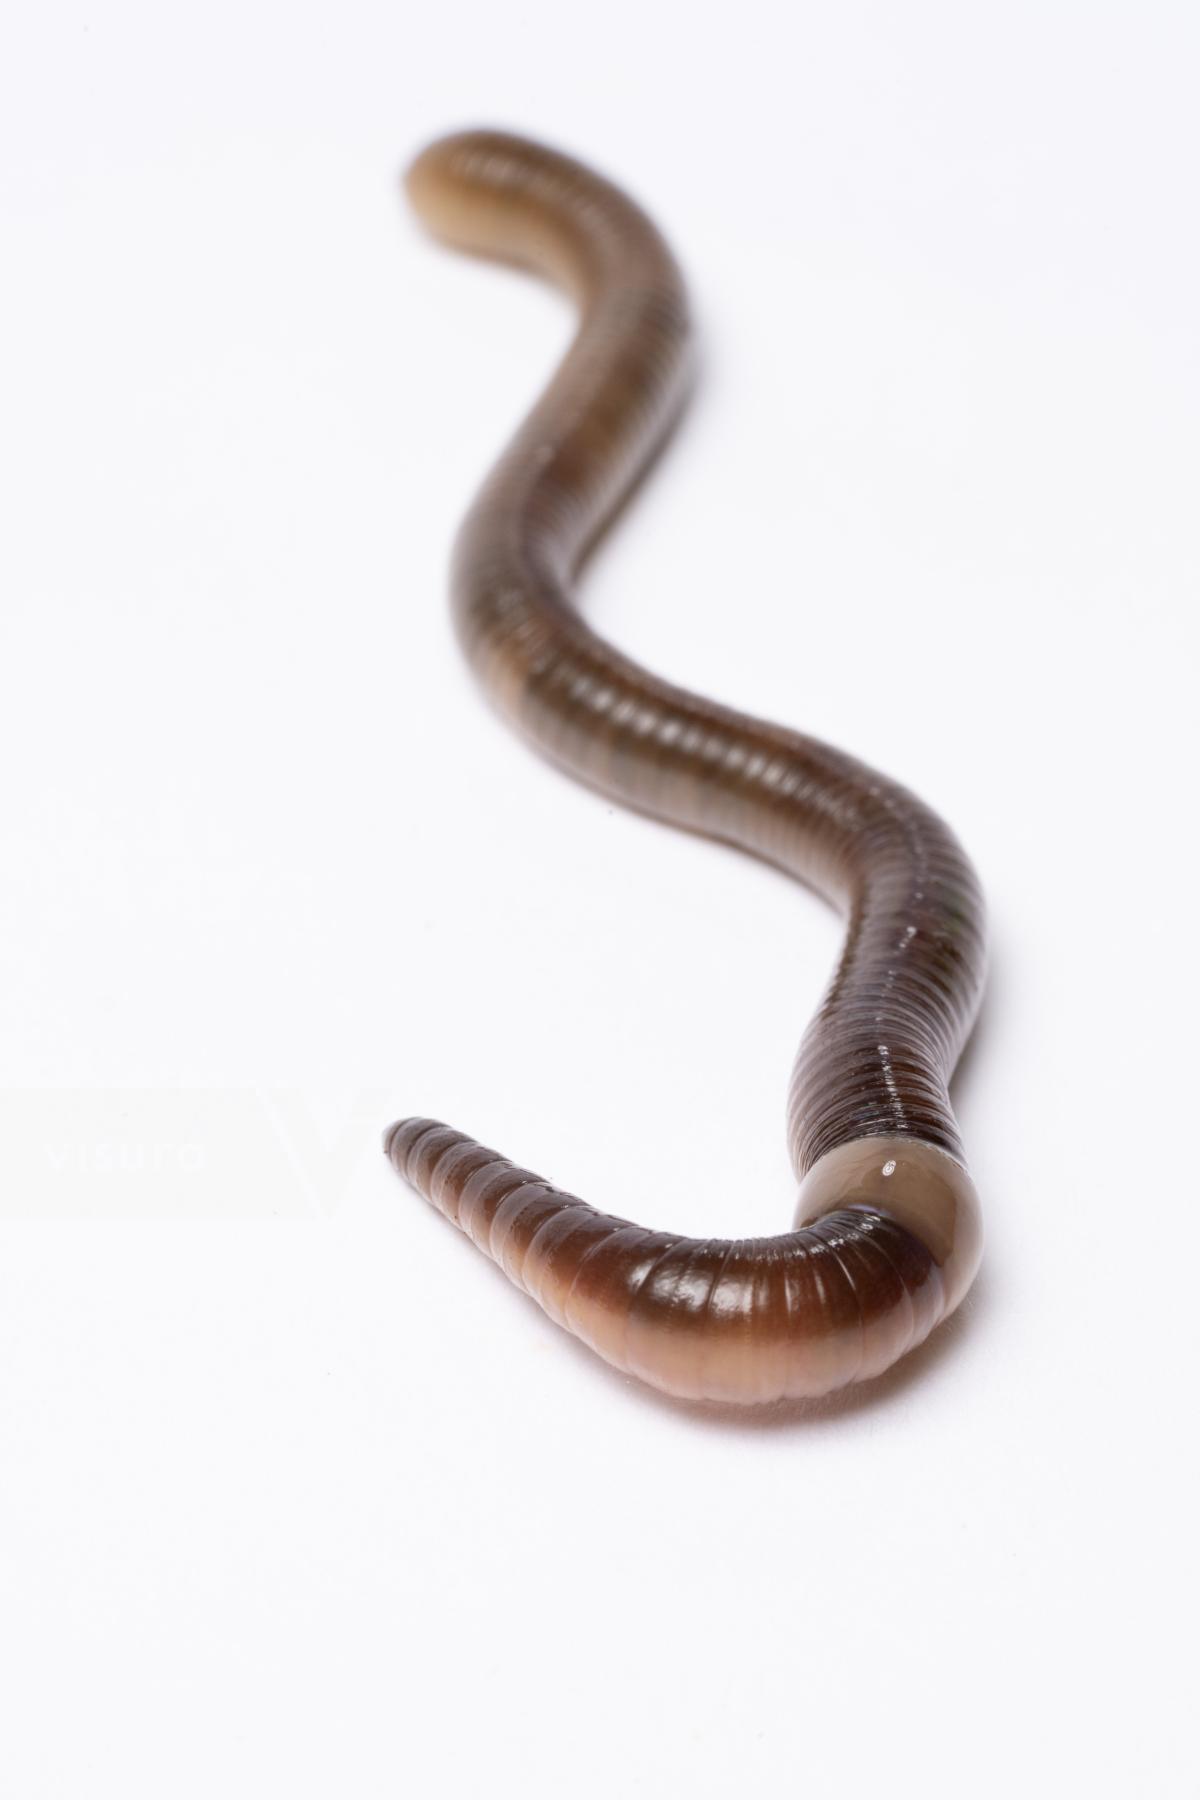 Purchase Invasive Jumping Worms by David Degner